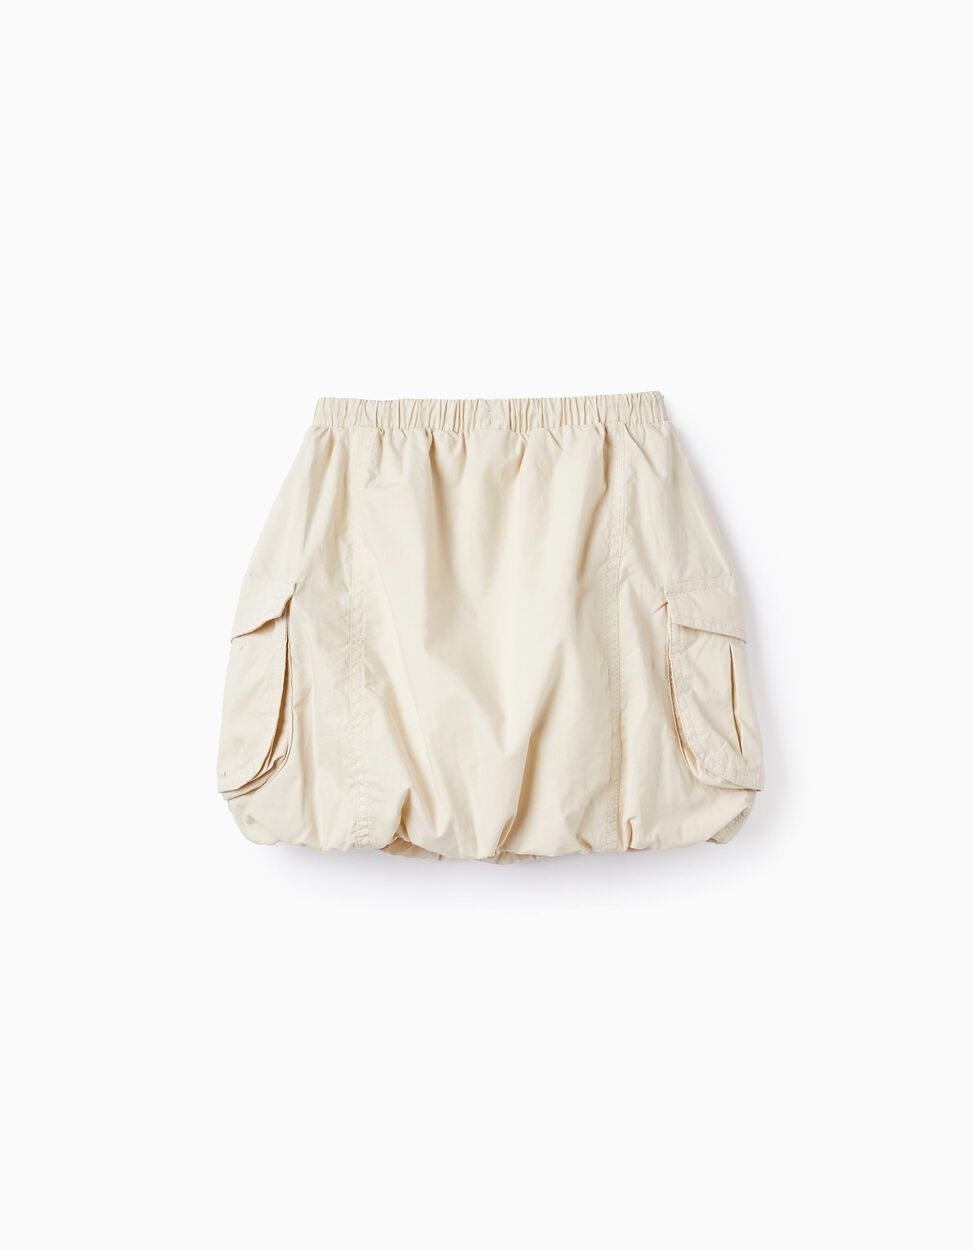 Buy Online Cargo Skirt with Cotton Lining for Girls, Beige